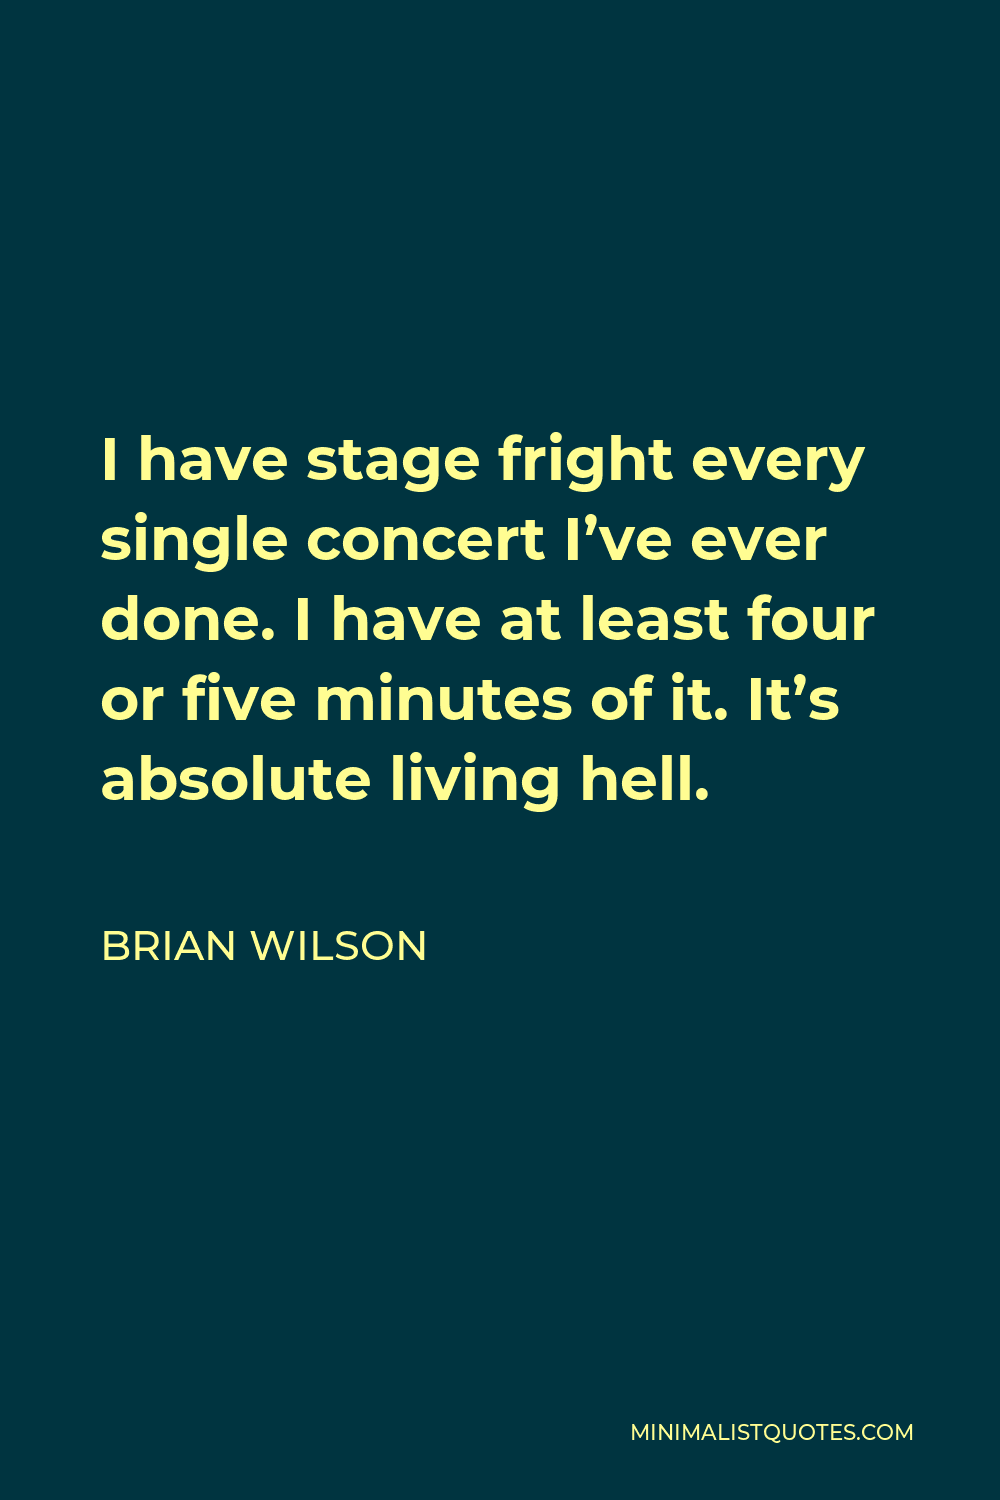 Brian Wilson Quote - I have stage fright every single concert I’ve ever done. I have at least four or five minutes of it. It’s absolute living hell.